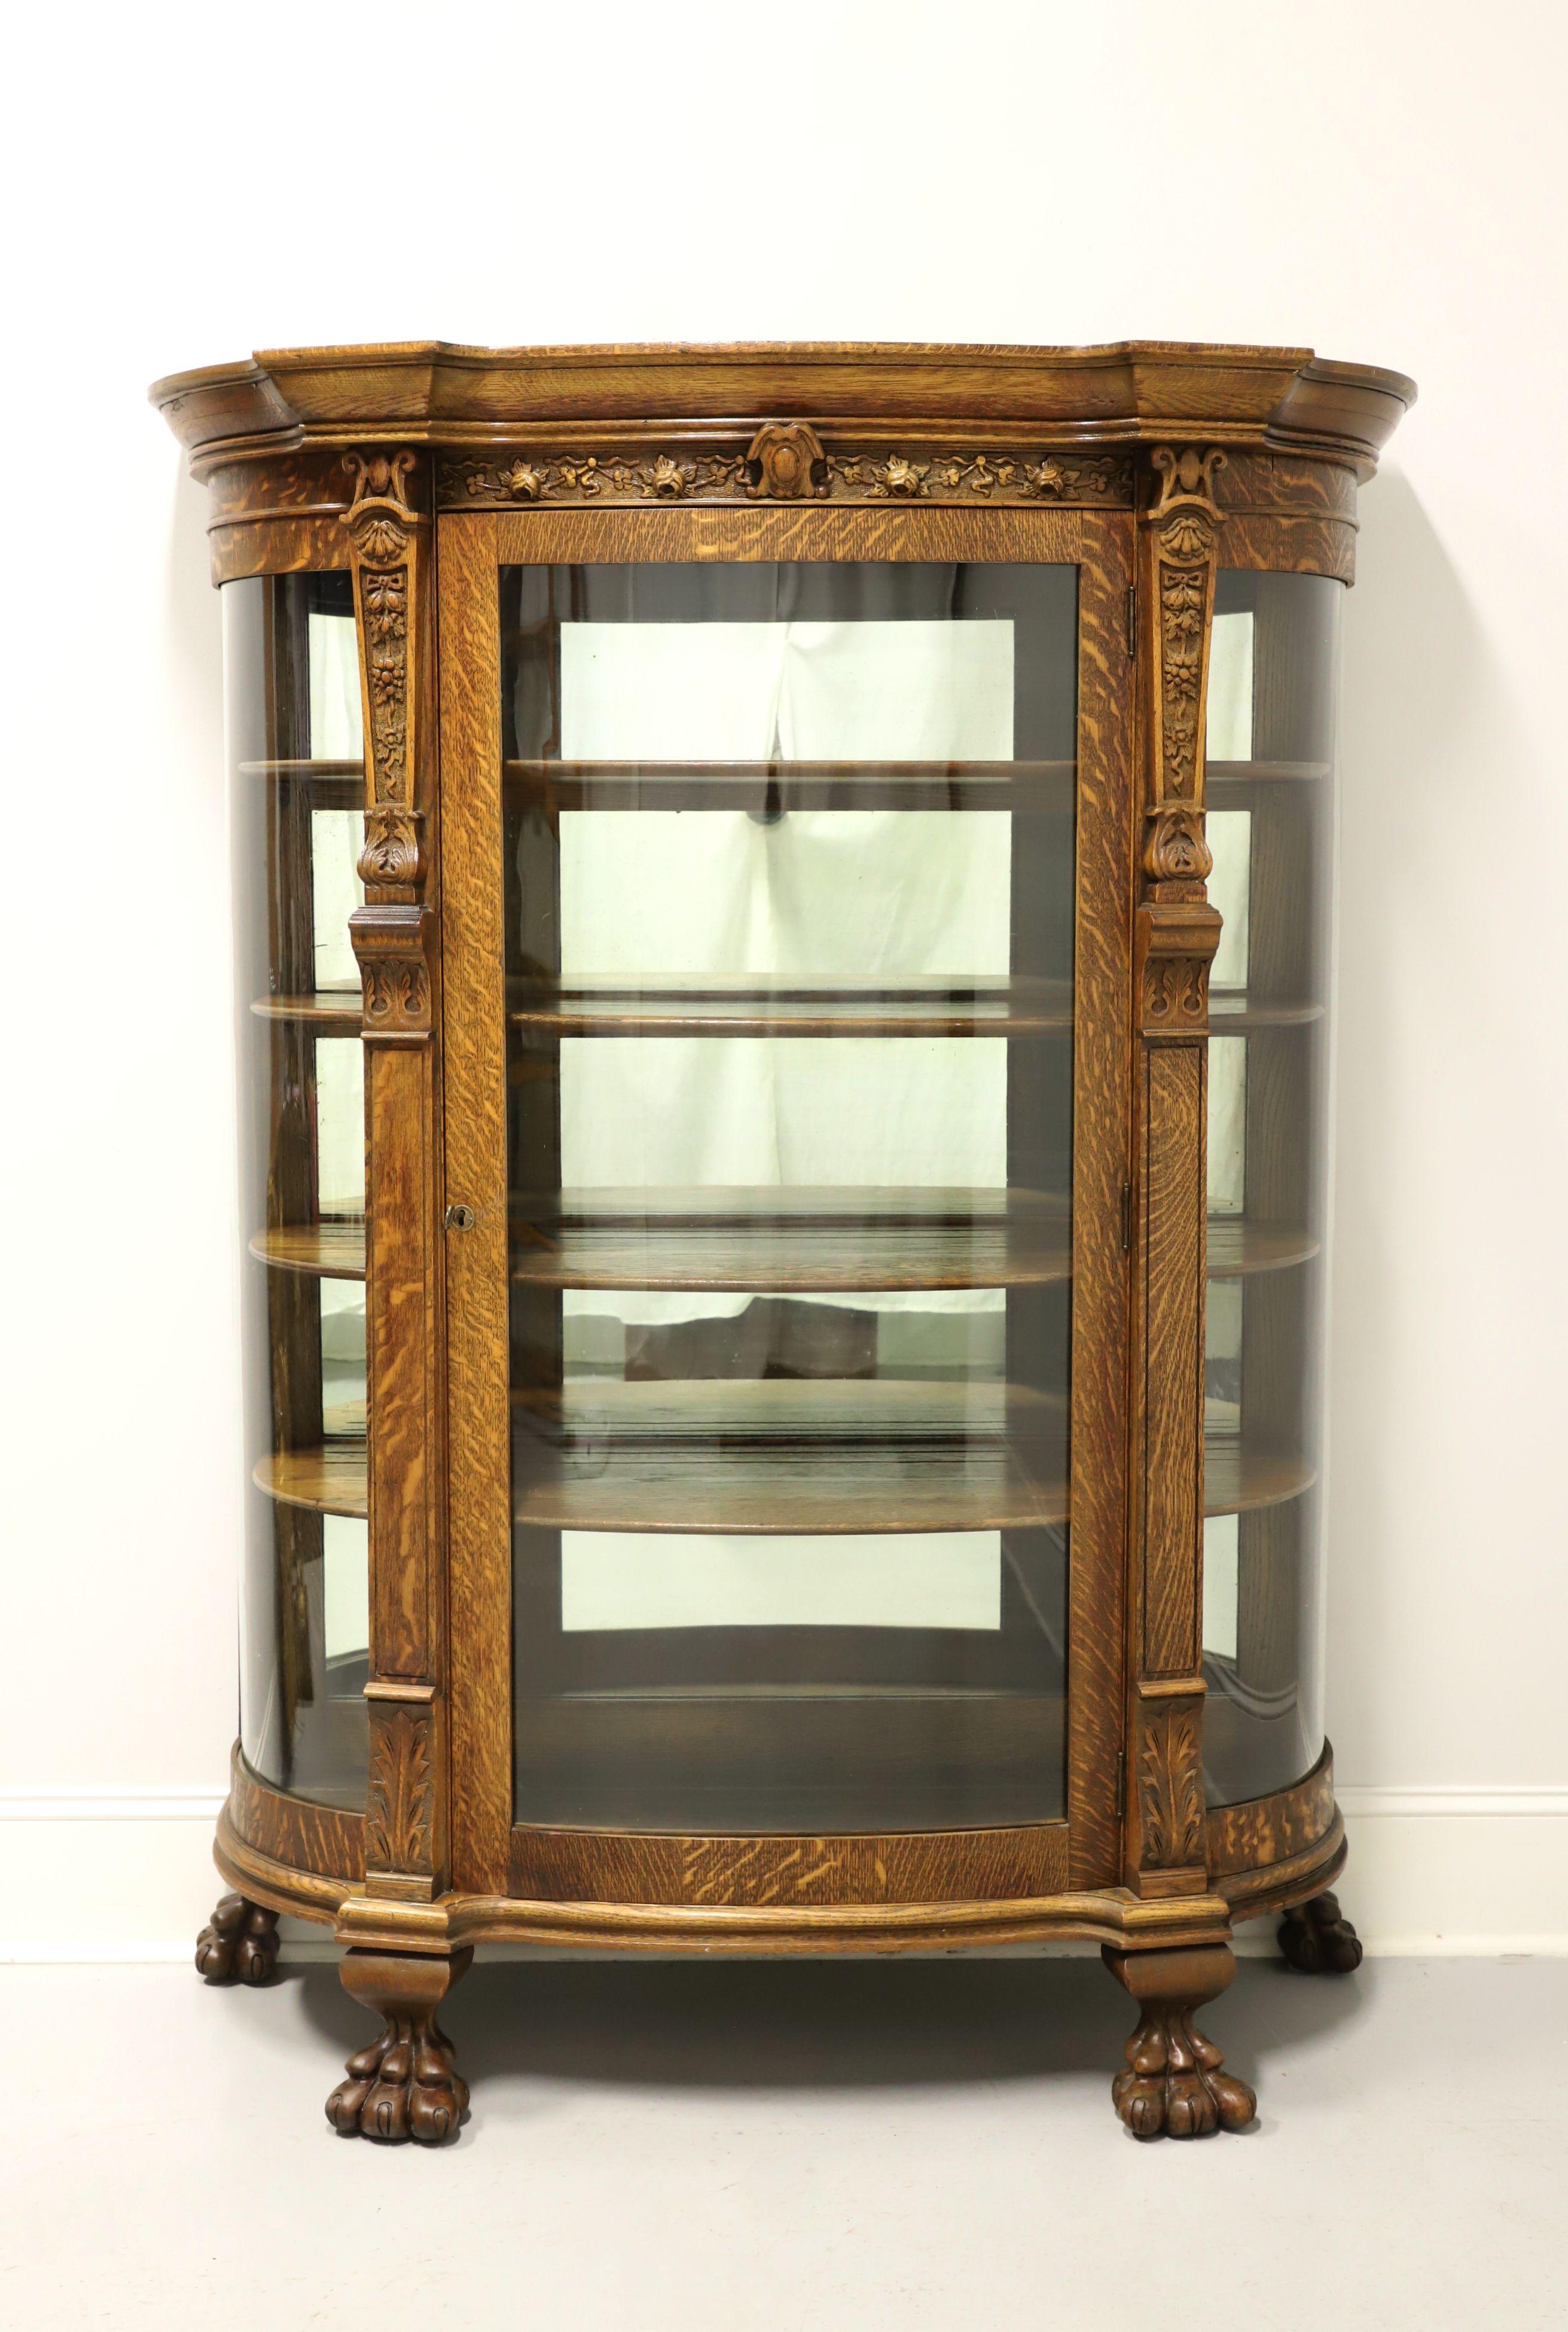 An antique bowfront china cabinet, unbranded. Tiger oak with decorative carvings, crown molding to top, carved columns flanking center door, brass keyhole escutcheon & key, and large paw feet. Cabinet features a single lockable door & side panels of